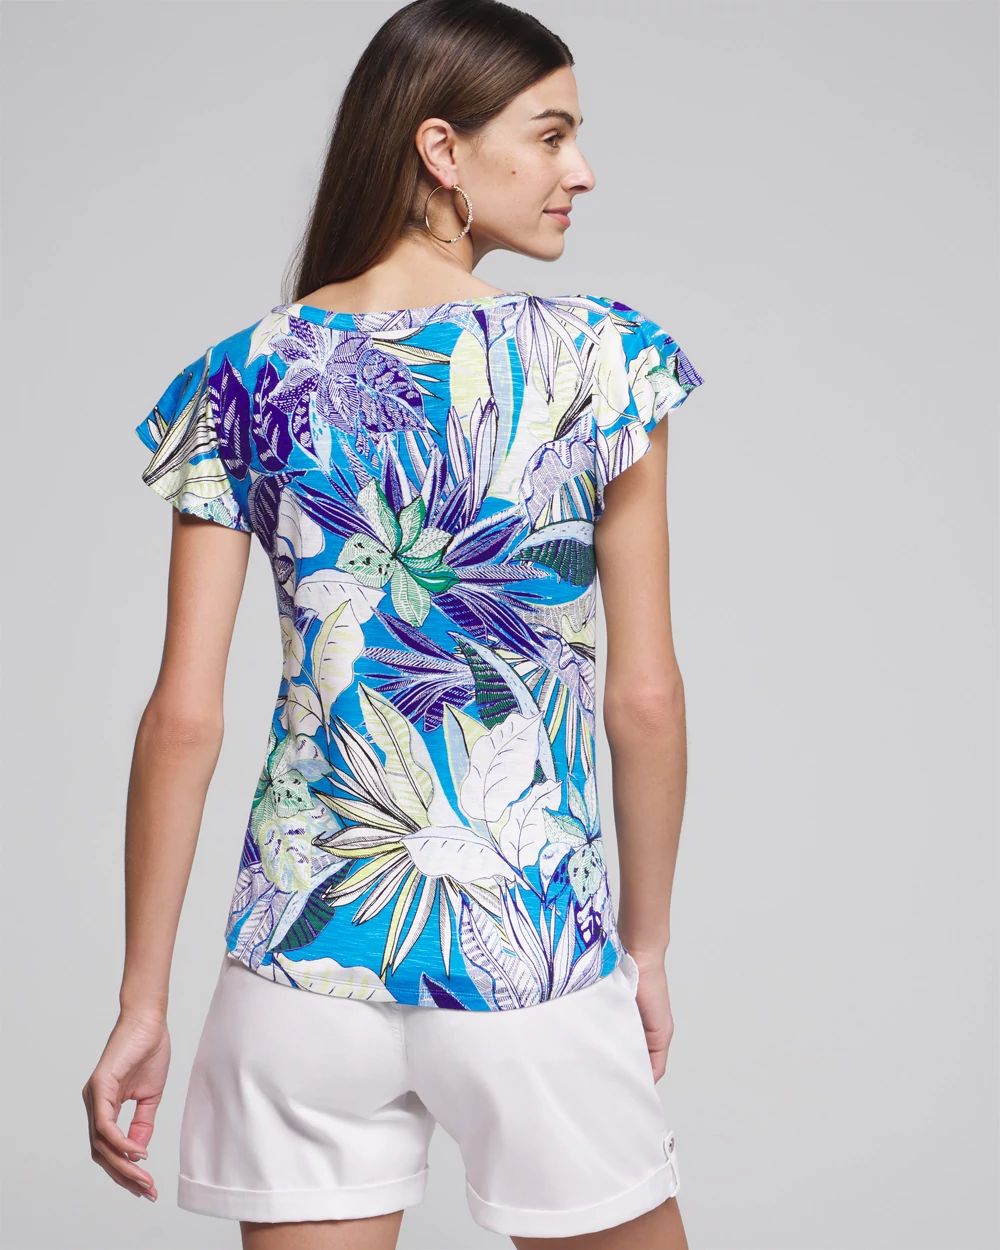 Outlet WHBM Ruffle Tee